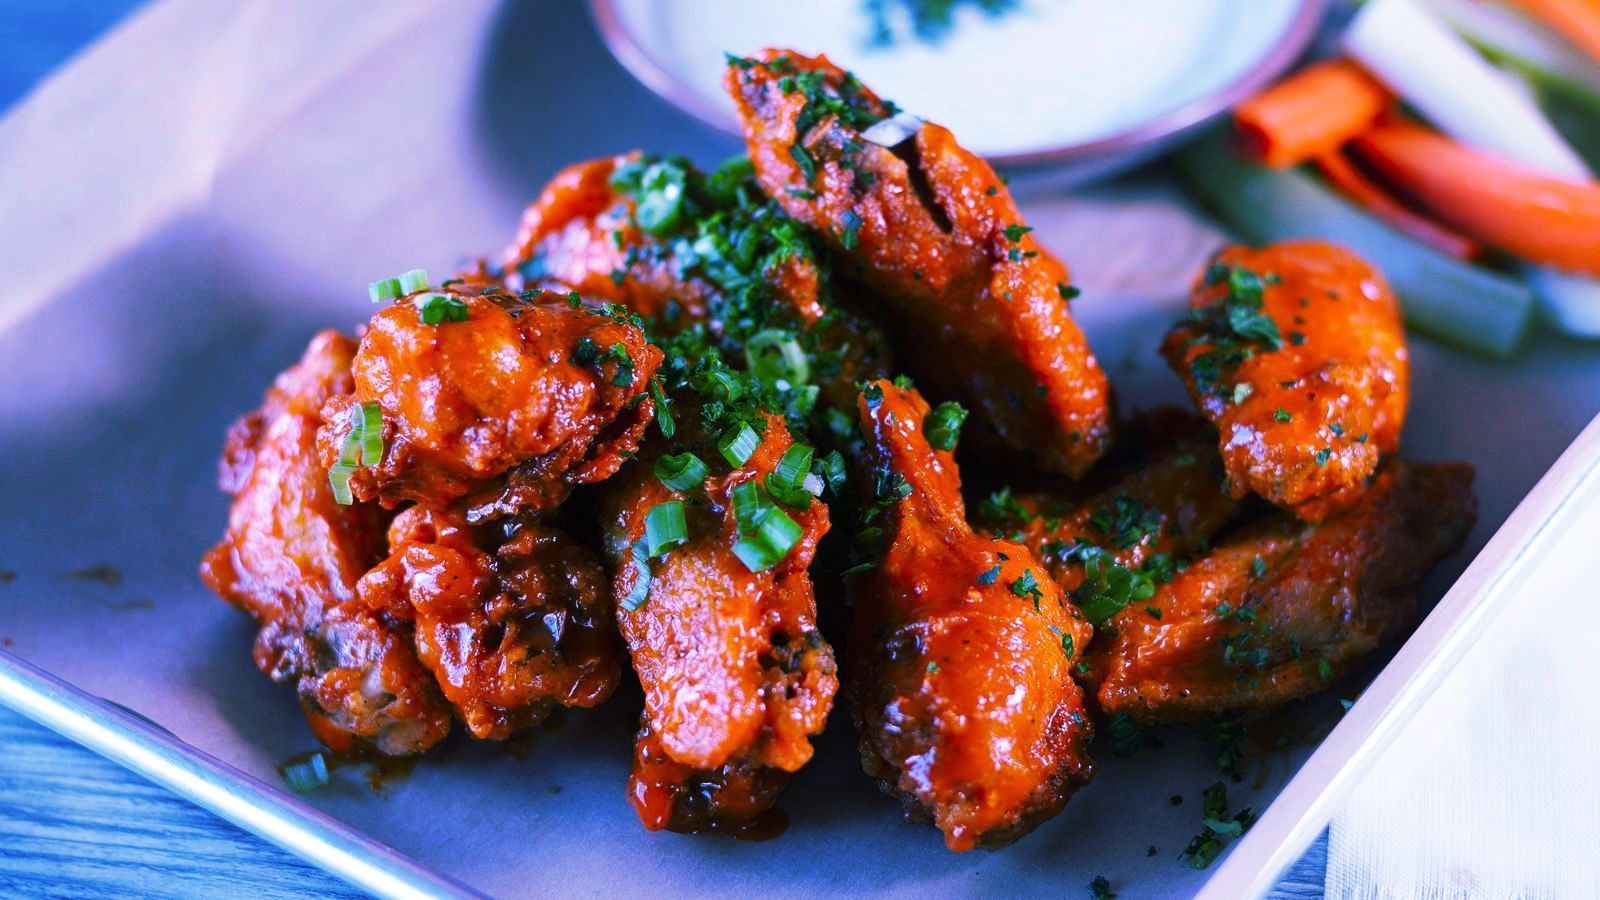 A close up of a plate of chicken wings on a table